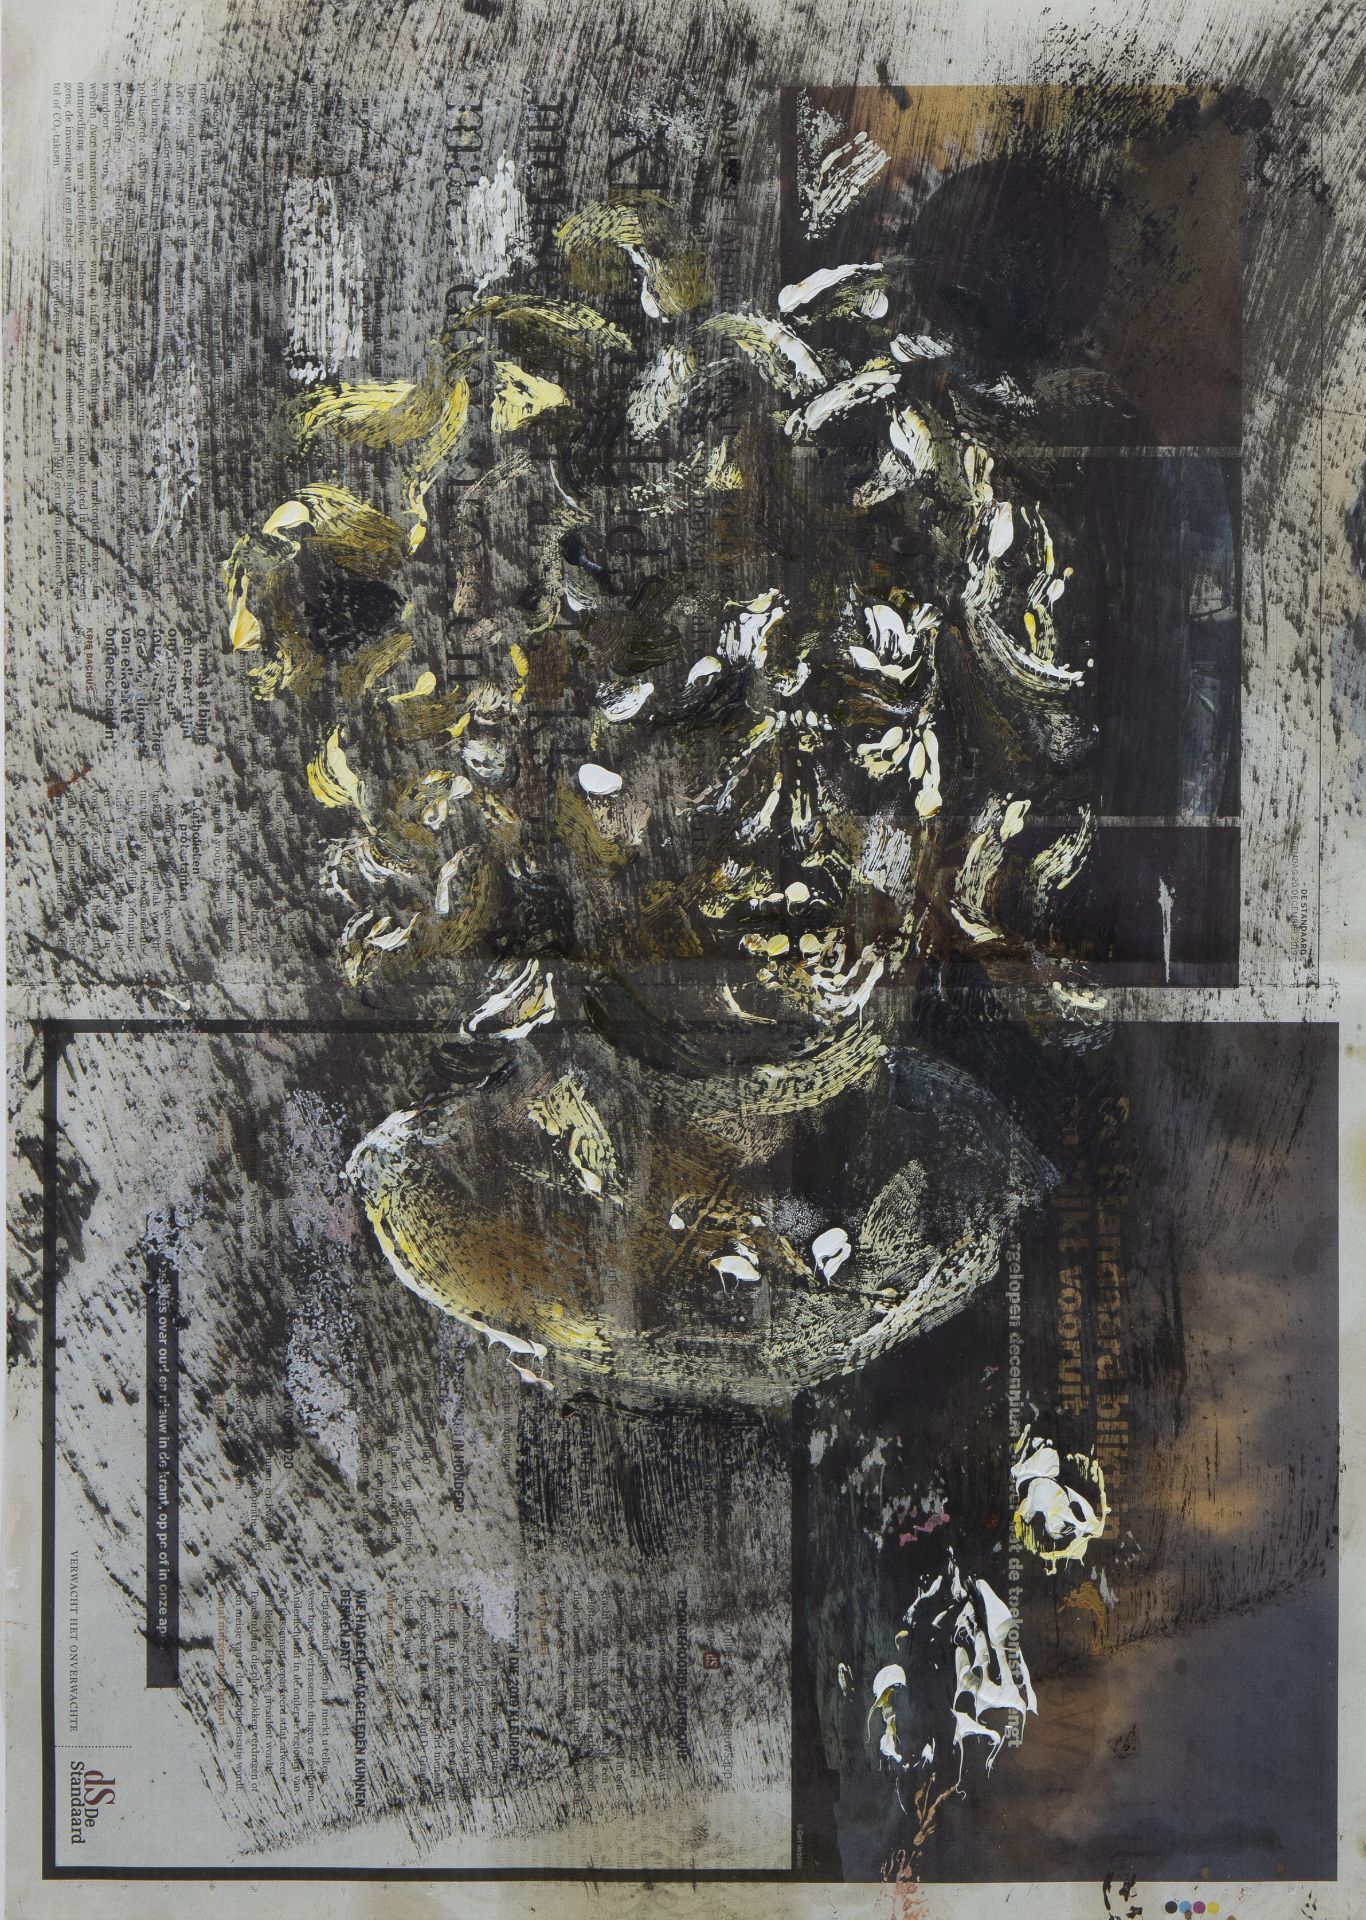 Matthieu RONSSE (1981), mixed media 'LOSING 'HIM' (ALLEZ RETOUR), signed and dated 2020